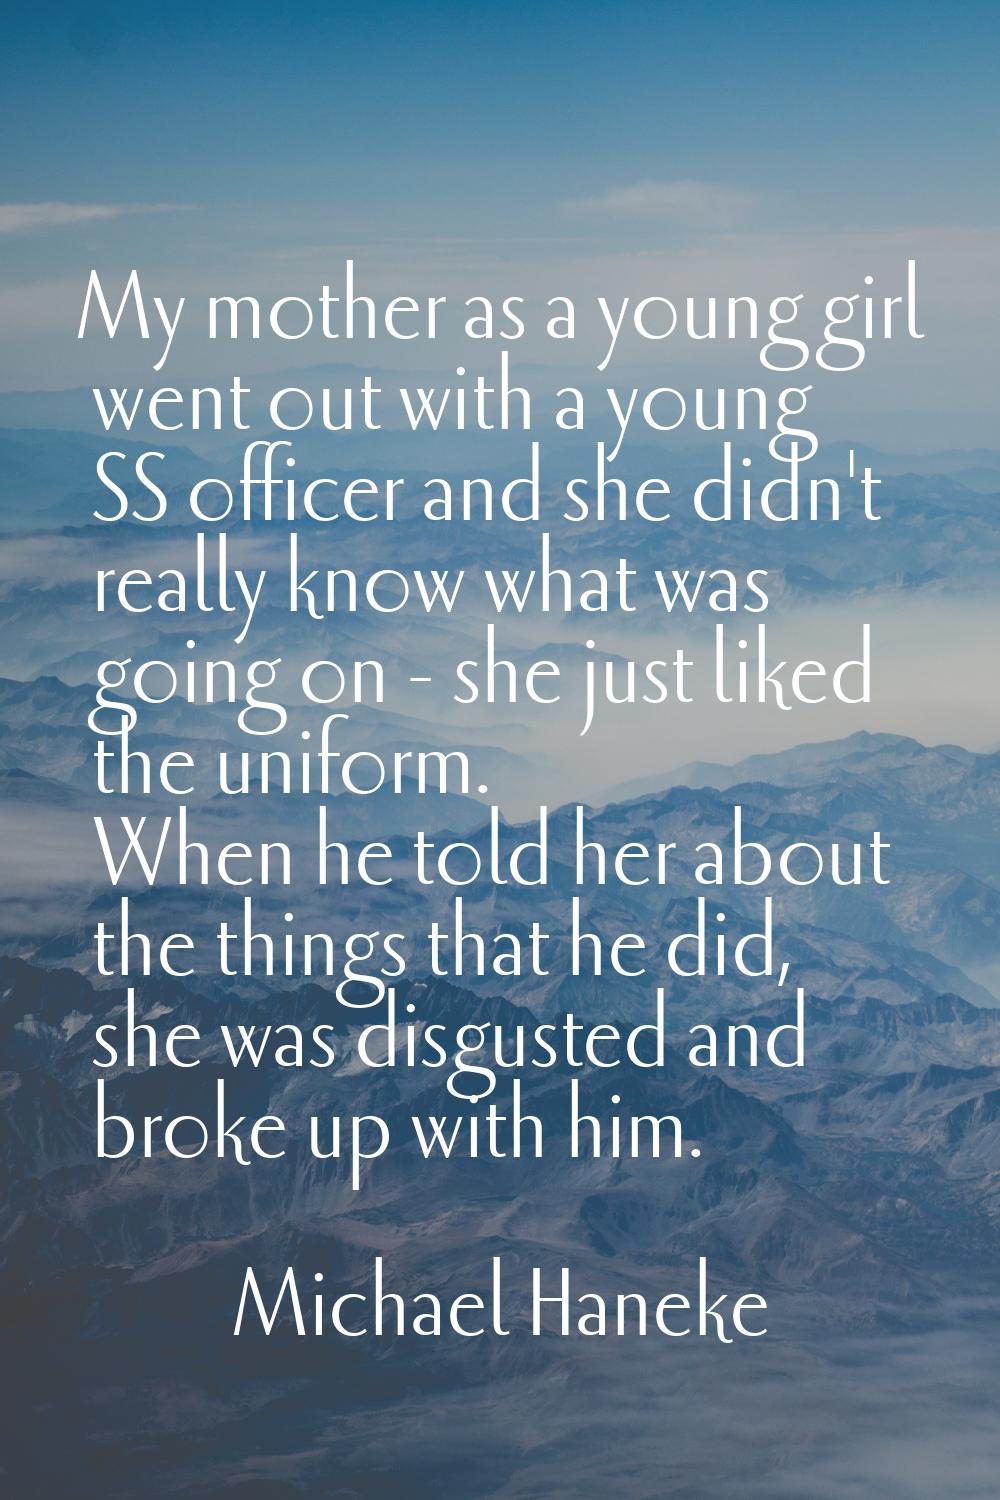 My mother as a young girl went out with a young SS officer and she didn't really know what was goin